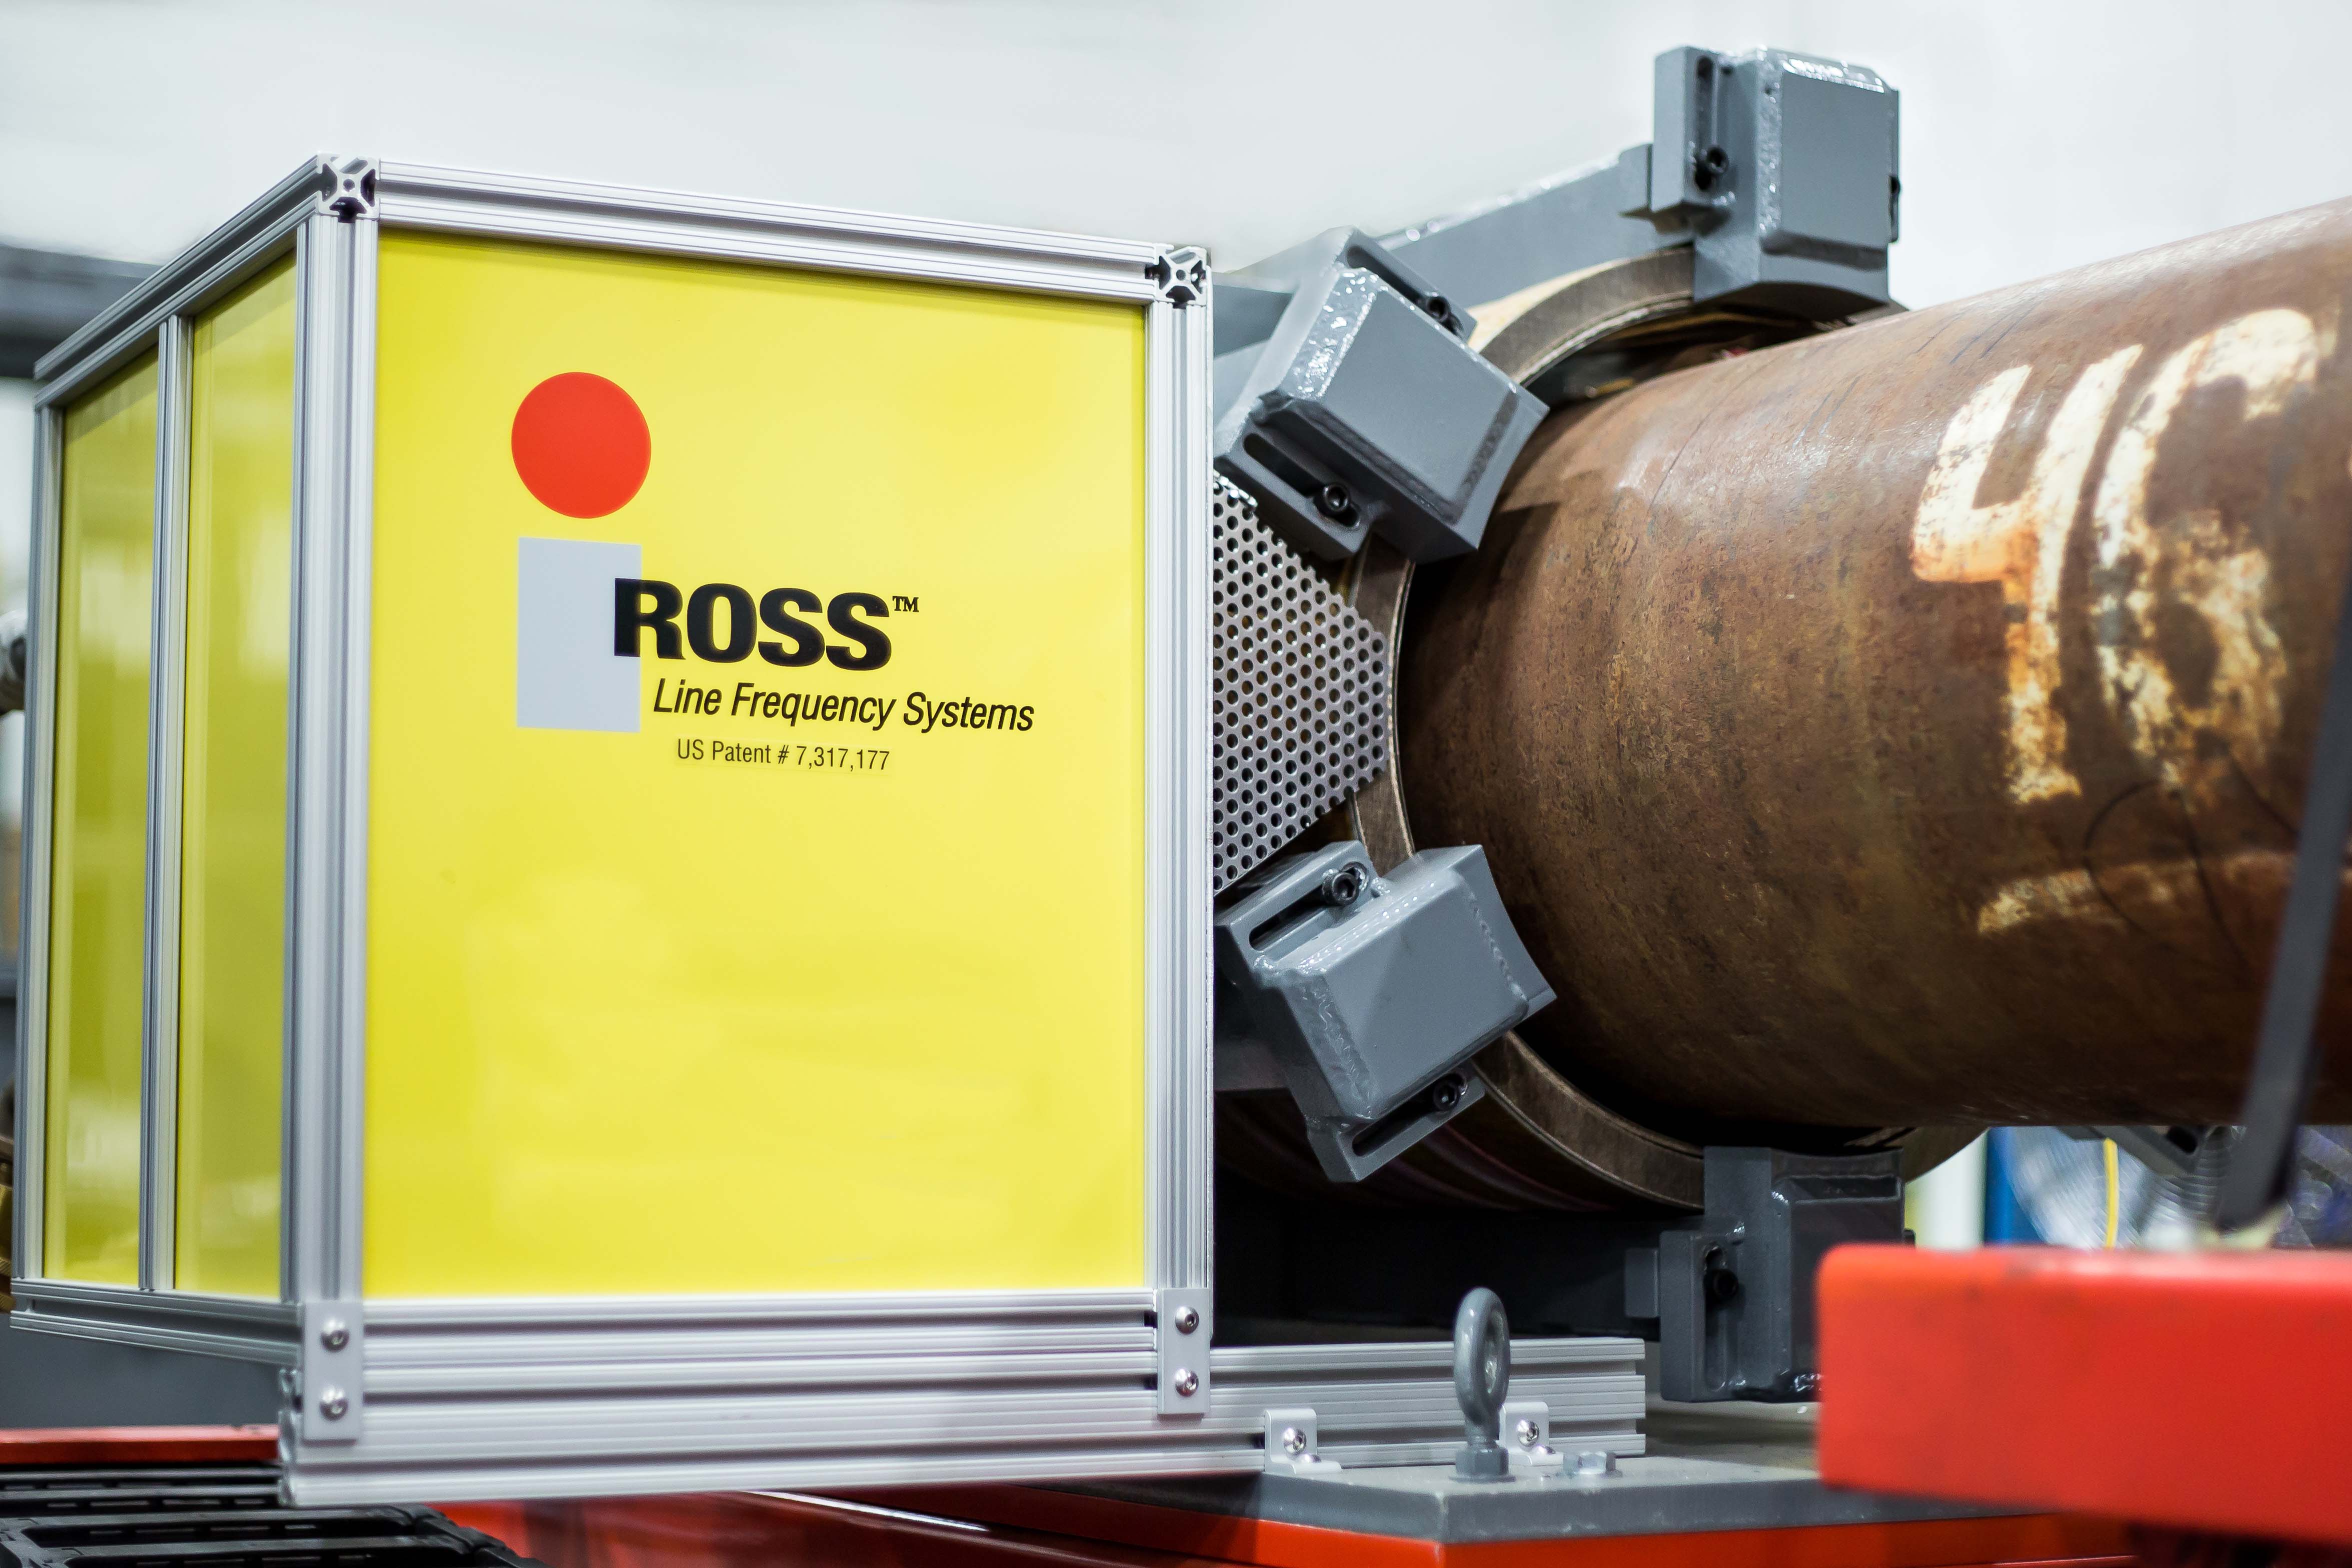 IRoss Phase 3™ Tube & Pipe Heating System